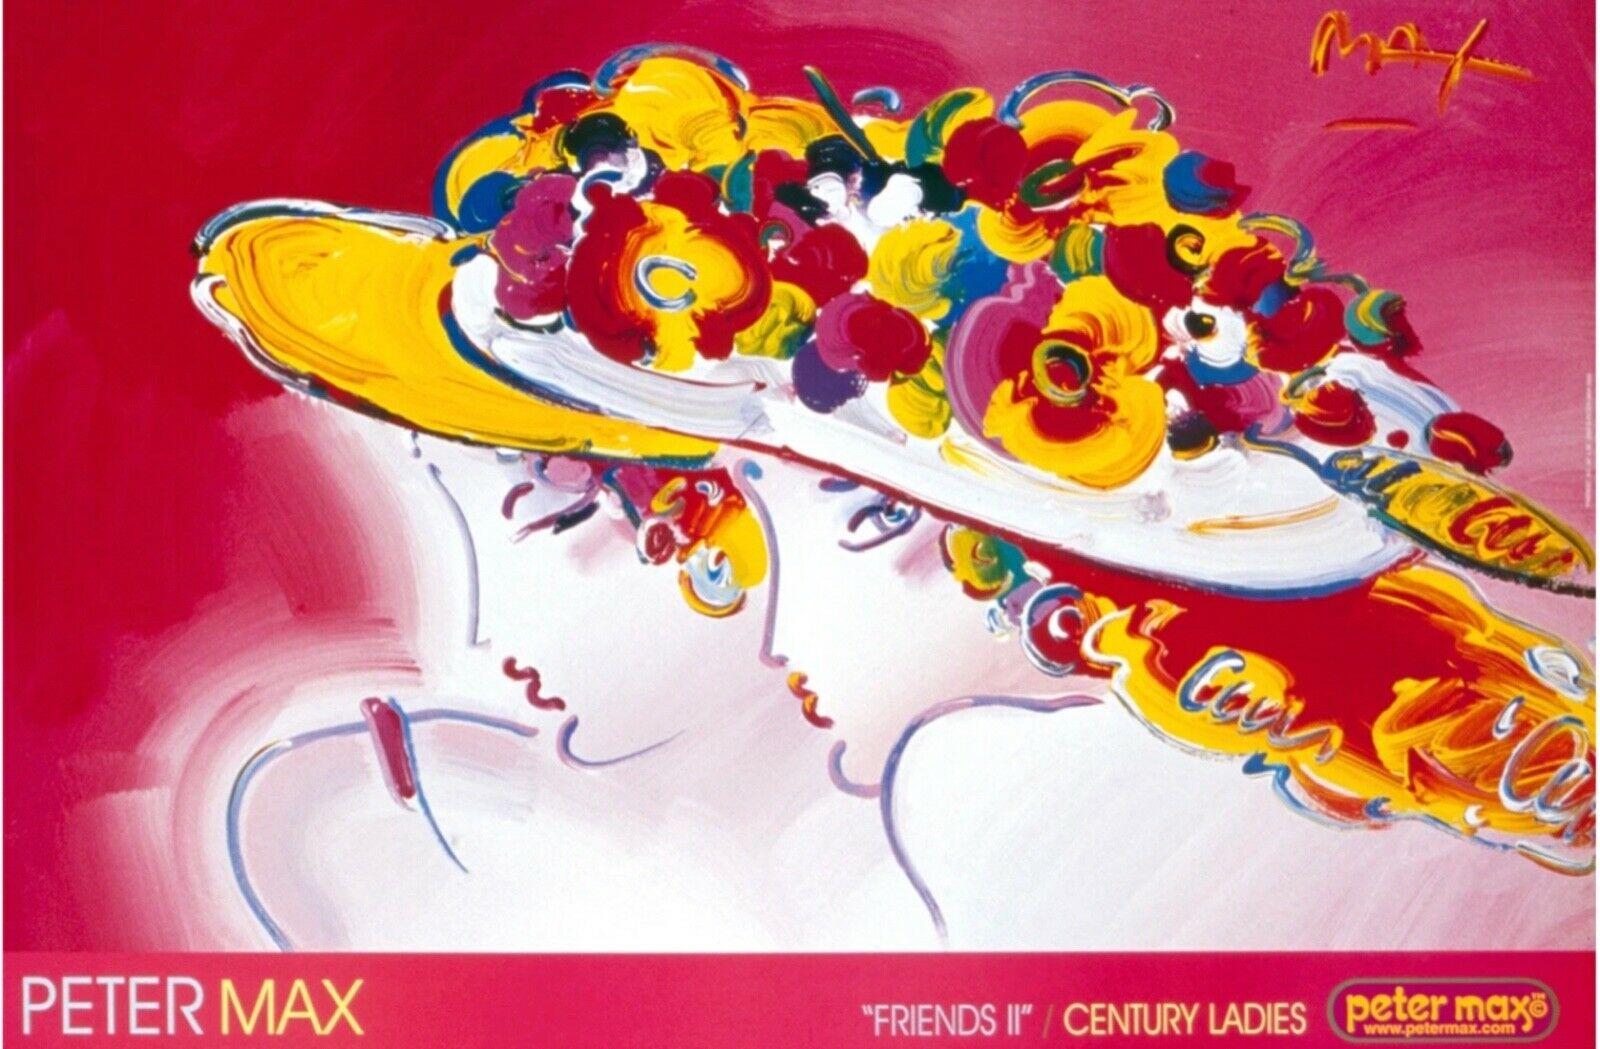 Peter Max Figurative Print - Friends / Century Ladies, 1991 Offset Lithograph - SIGNED